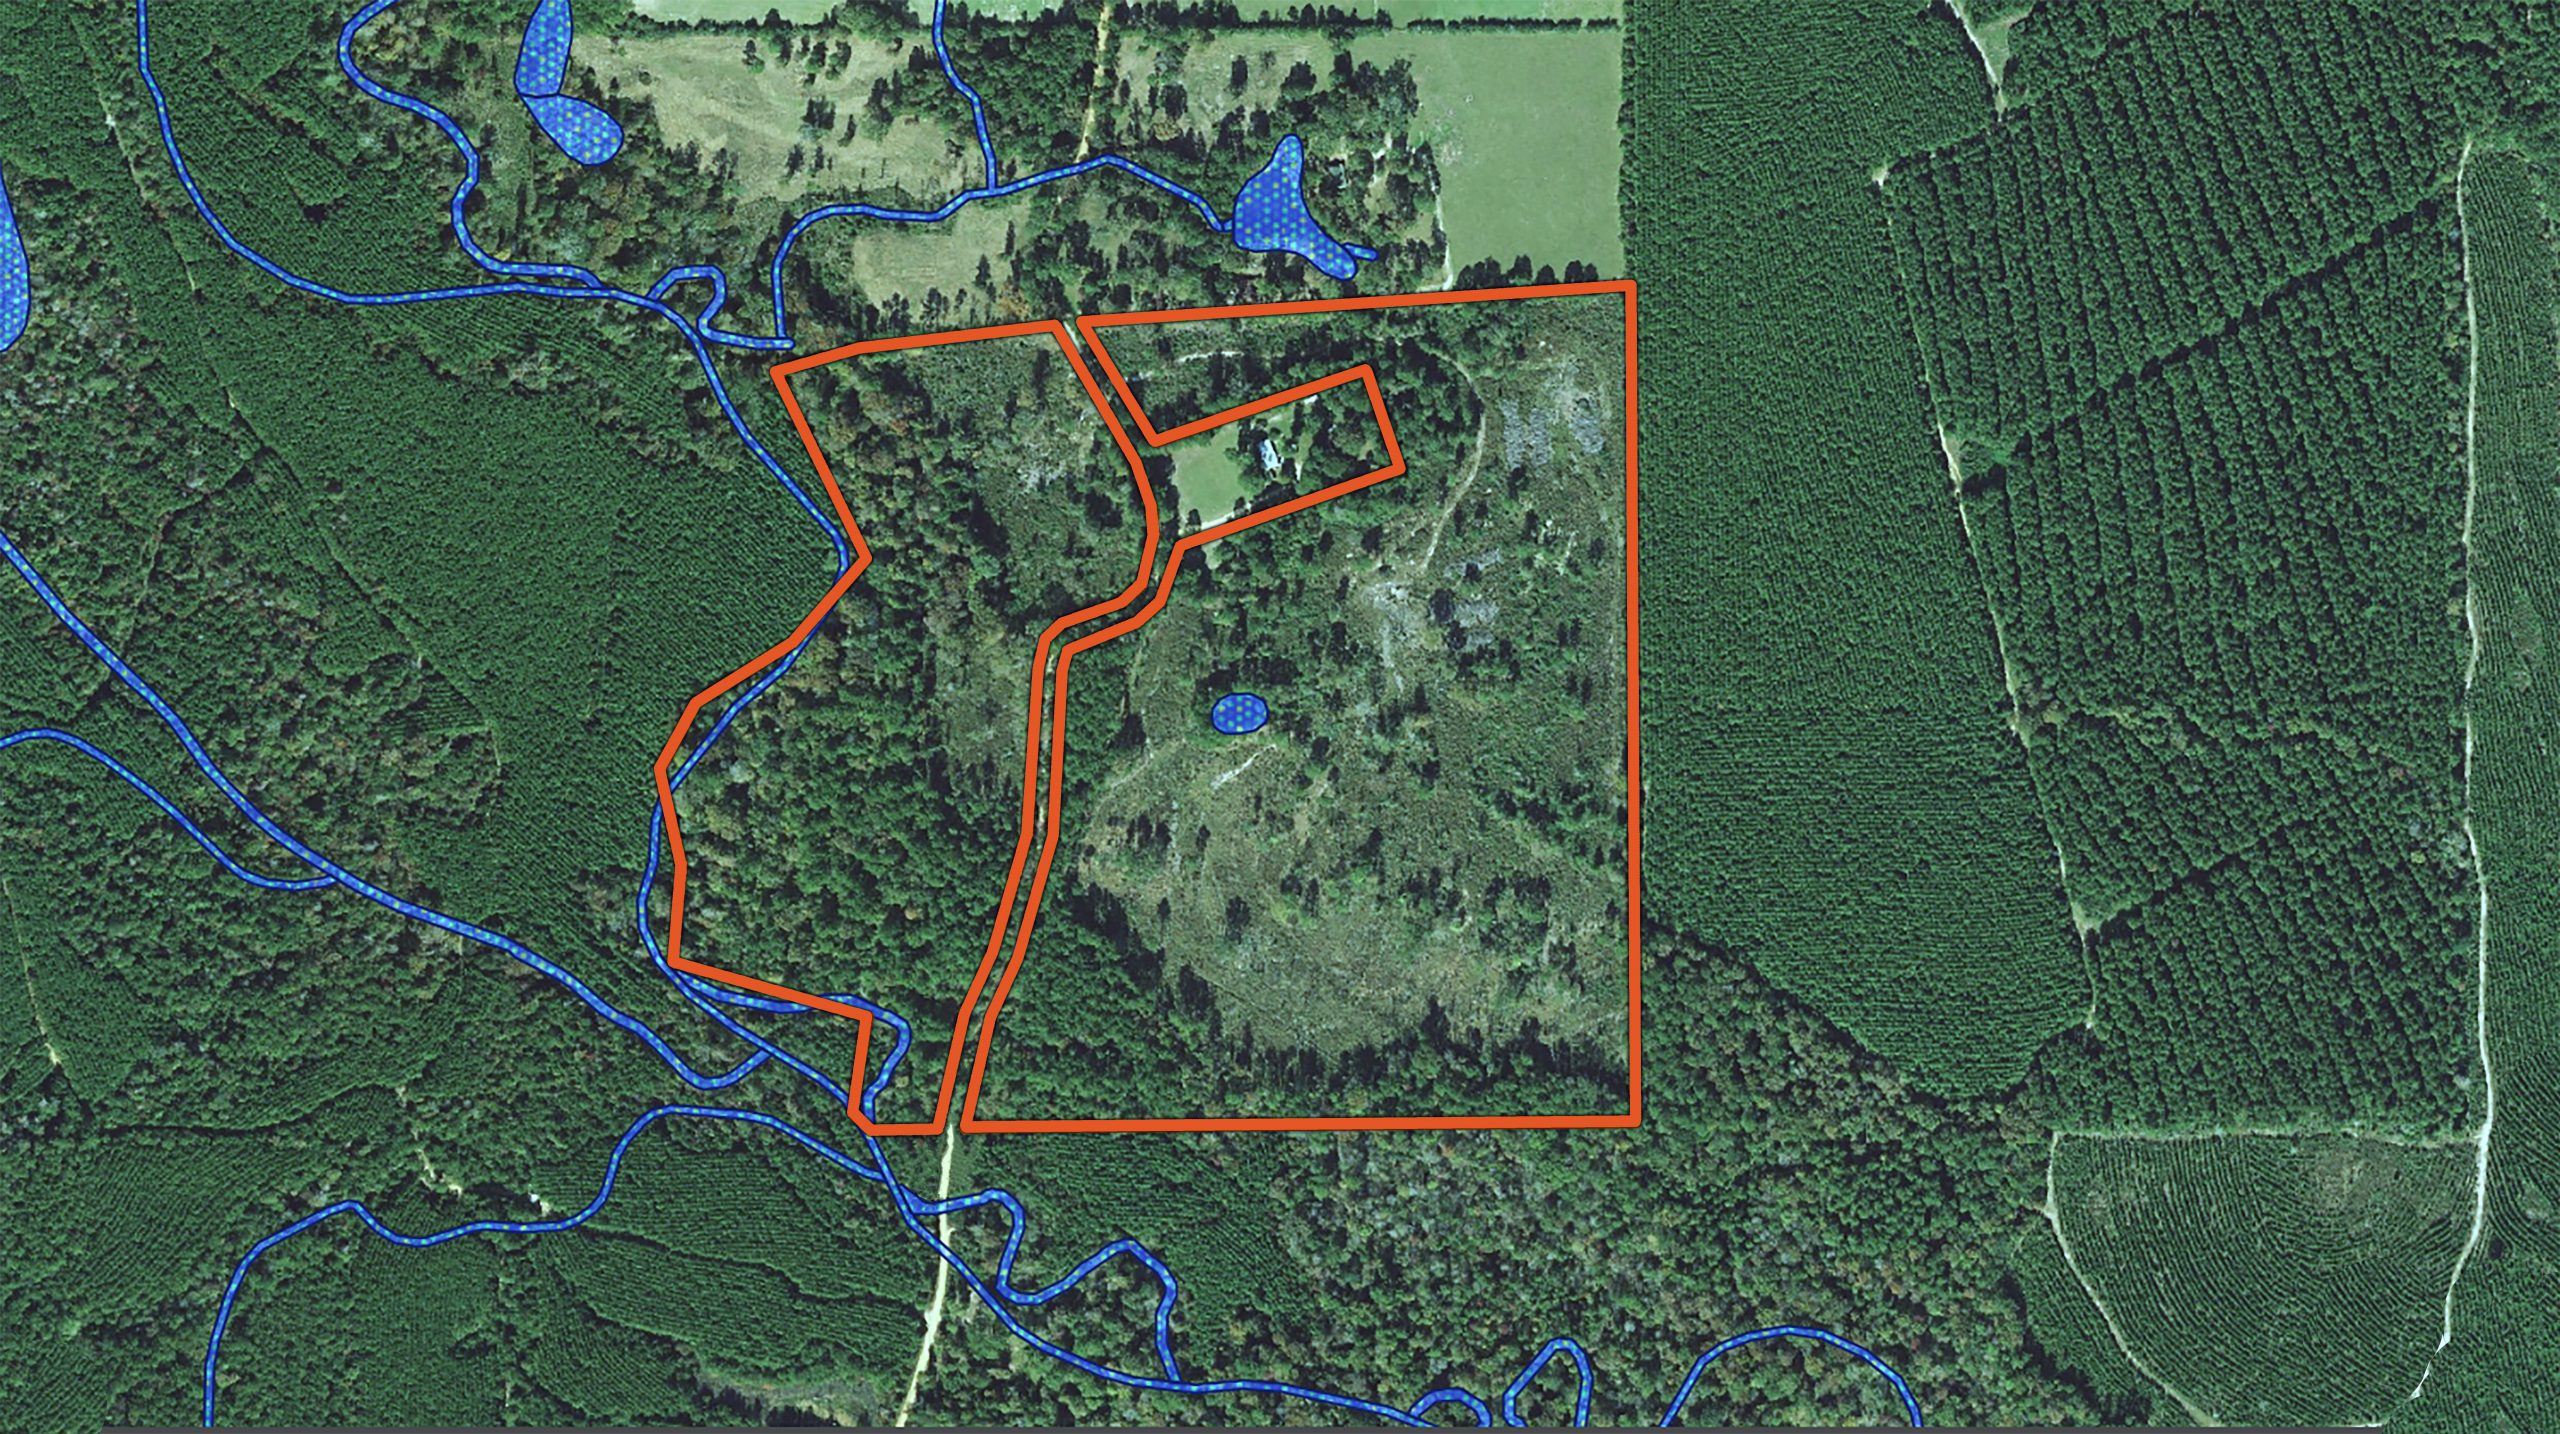 Image: Parcel map of 84 acres for sale in Polk county, TX.